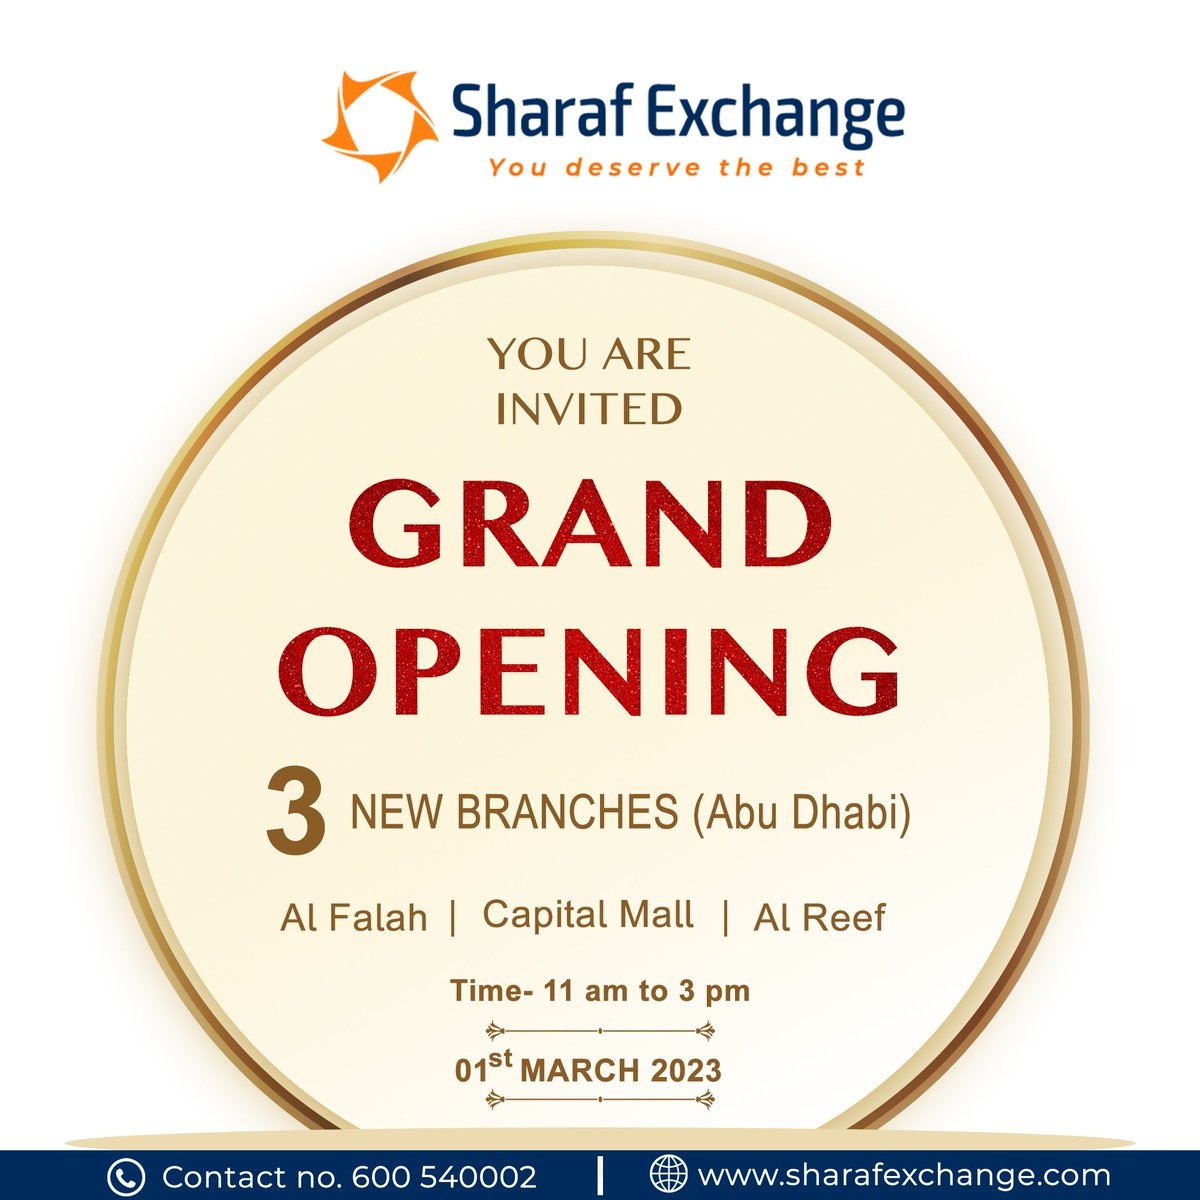 Announcement!!
Three new branches are coming up.

We invite you to visit our new branches 🎉💐

Thank you,
Team Sharaf Exchange ✨
.
#newbranch #branches #SharafExchange #opening #invitation #uaelife #UAENews #currencyexchange #moneytransfer #alfalah #capitalmall #alreef